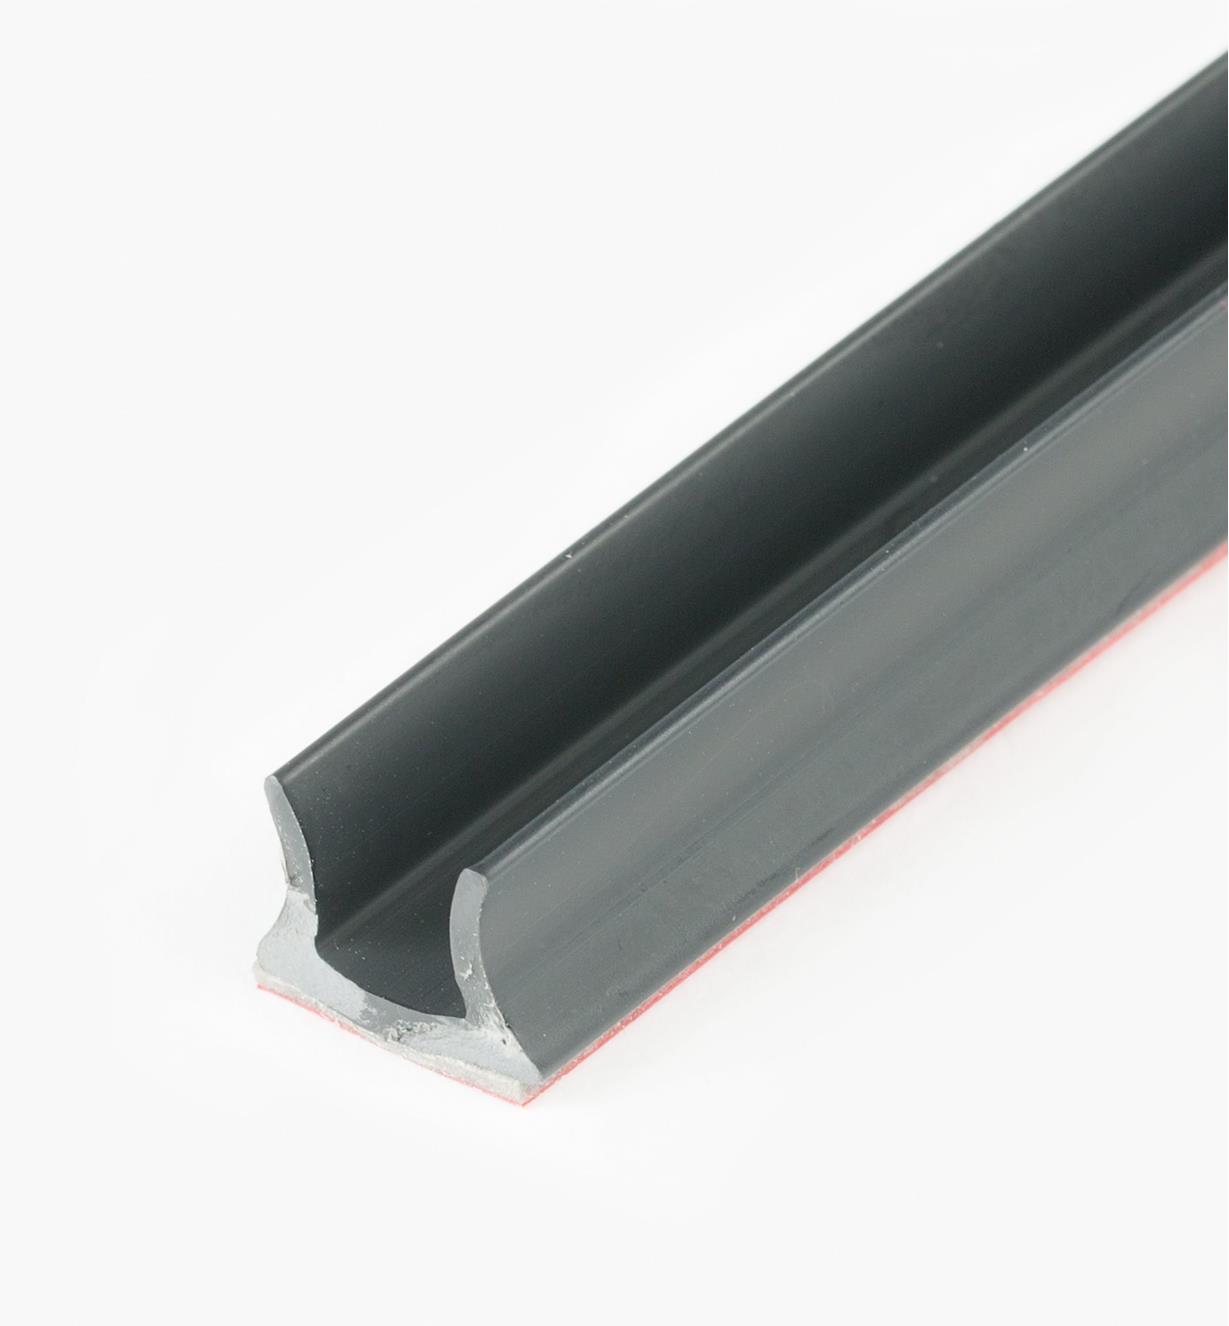 Close-up of 1/4" extrusion end